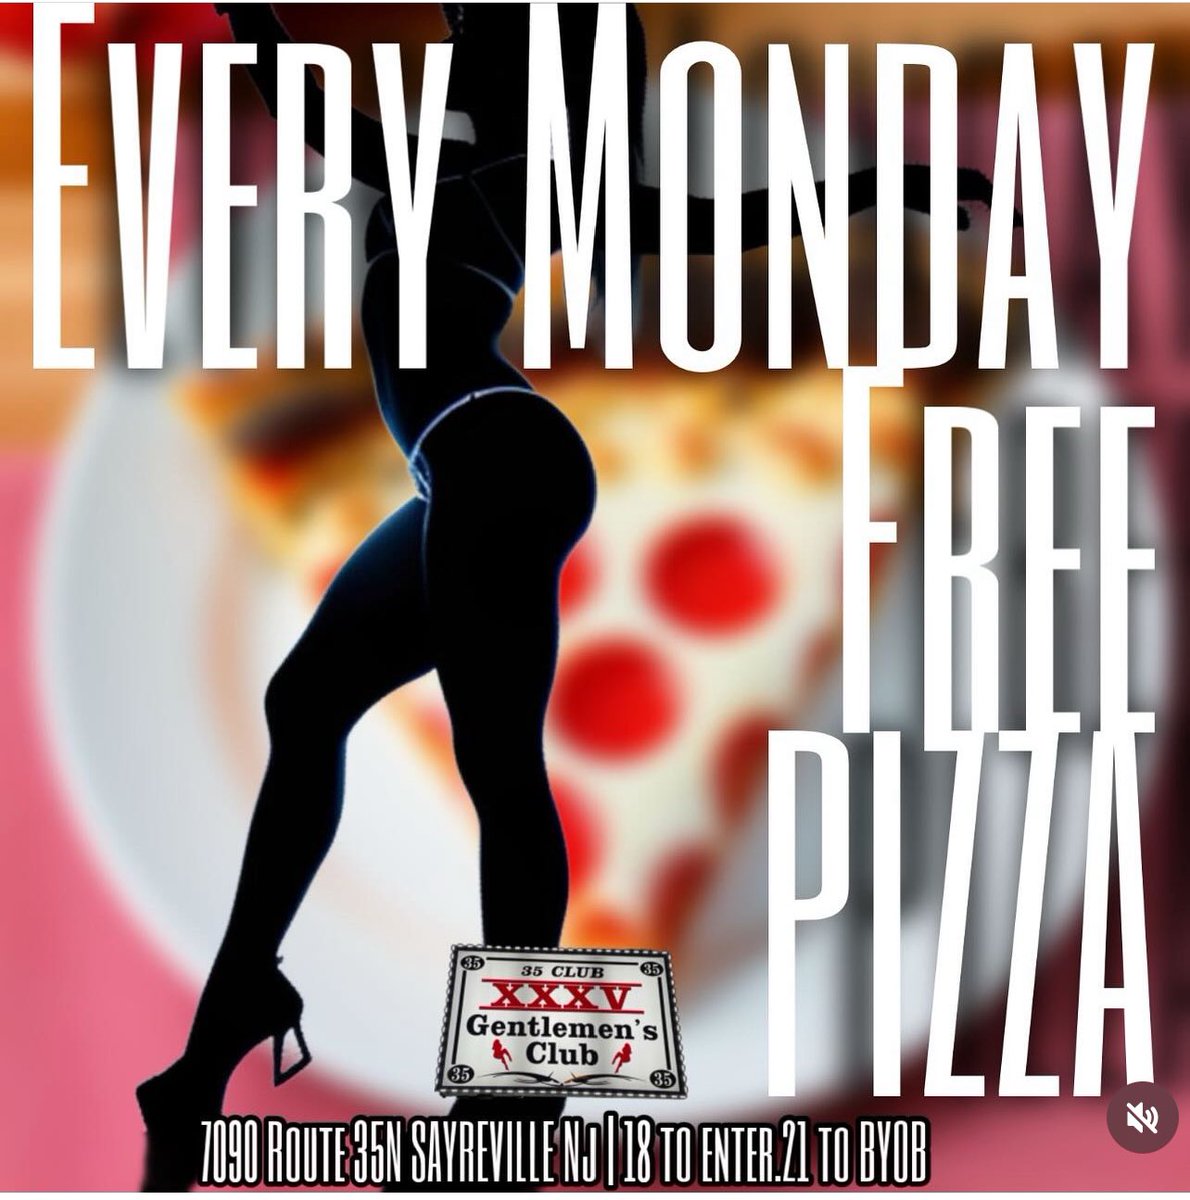 Doors open 6pm-4am
#FREEPIZZA 
Pizza Mondays 
Grab a slice and relax with these ladies
ALL MLB GAMES ON
NHL PLAYOFFS
NBA PLAYOFFS
7090 RT35N
Sayreville NJ
732-727-3550
XXXVCLUB.com